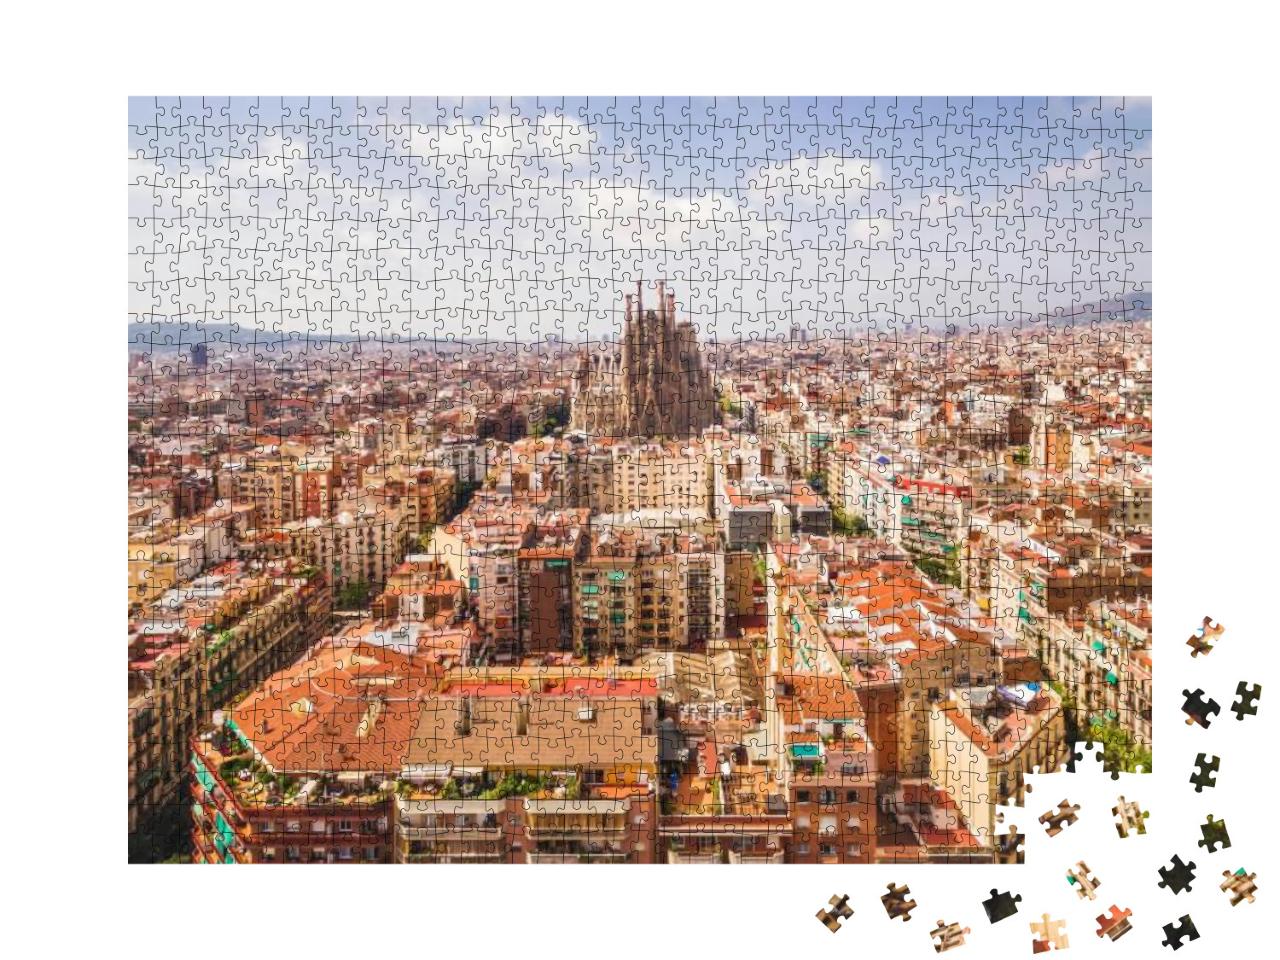 Sagrada Familia Cathedral & Barcelona Cityscape in Spain... Jigsaw Puzzle with 1000 pieces